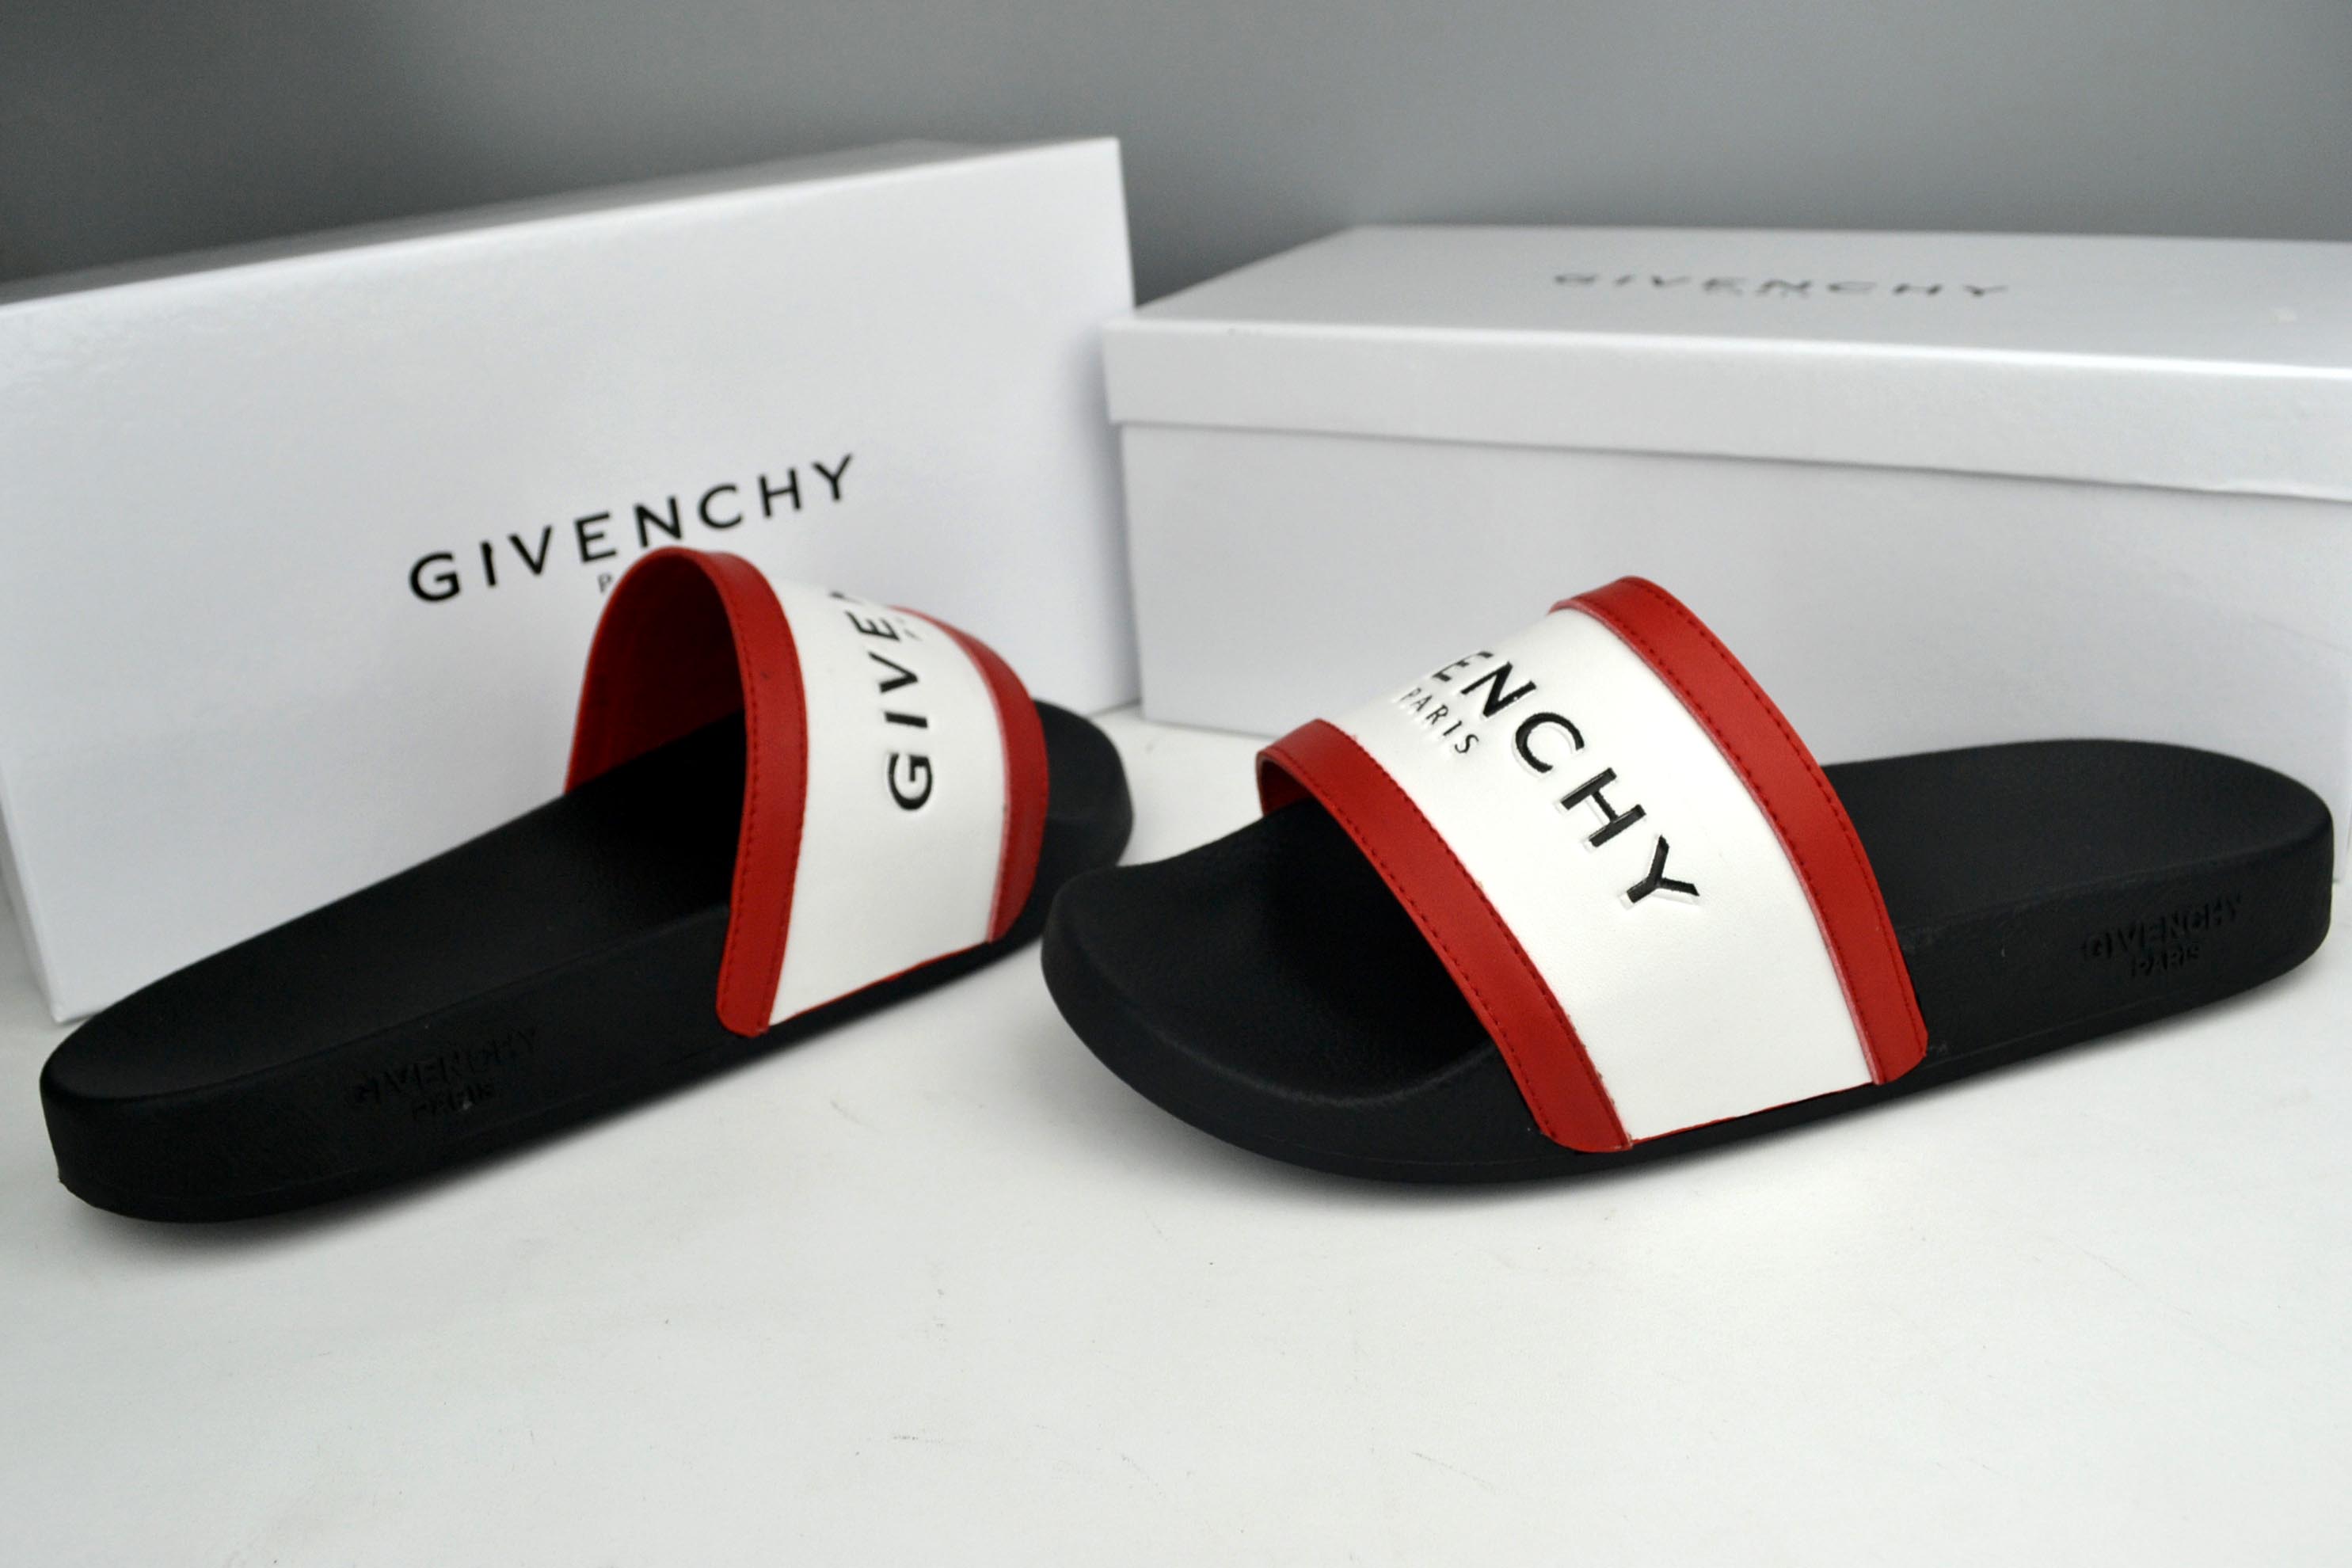 givenchy paris slippers price